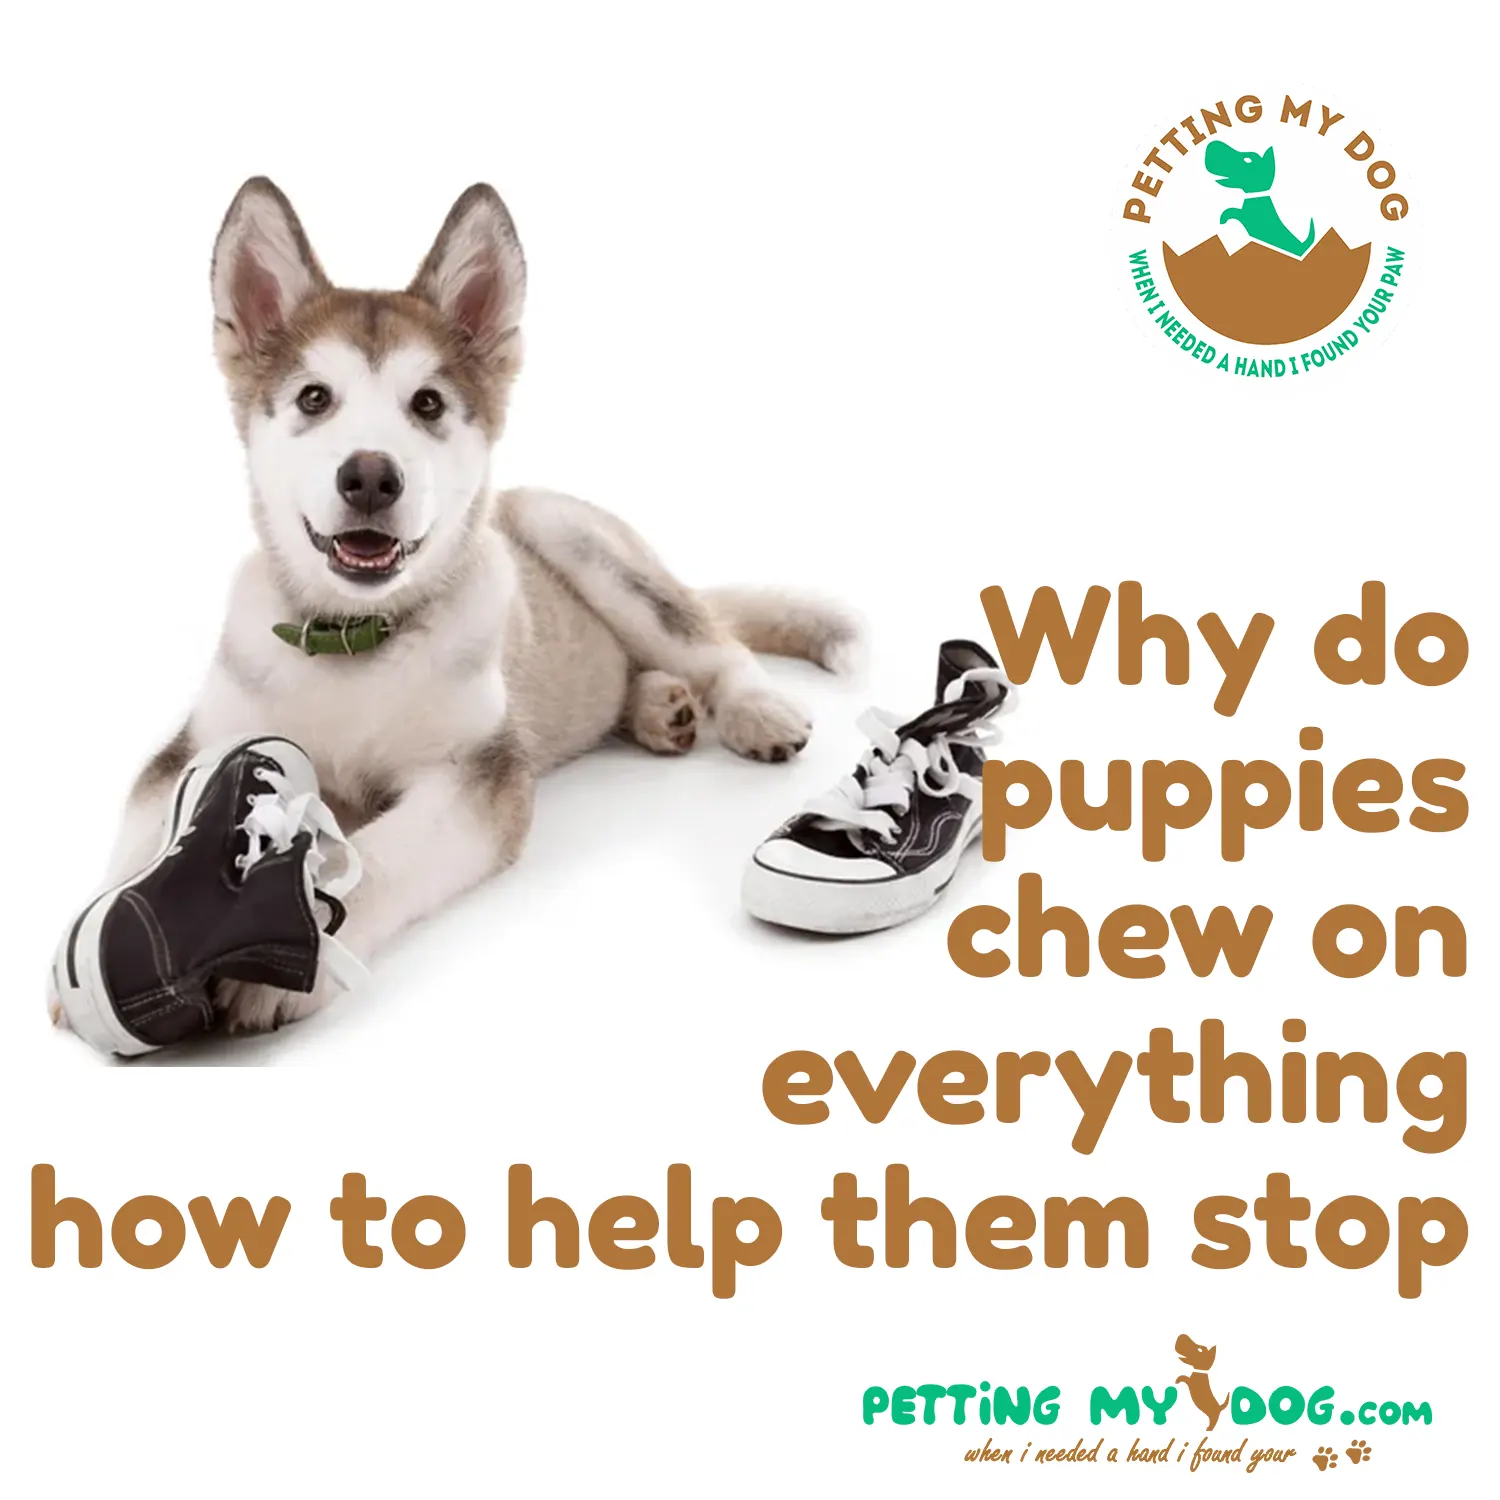 Why do puppies chew on everything how to help them stop